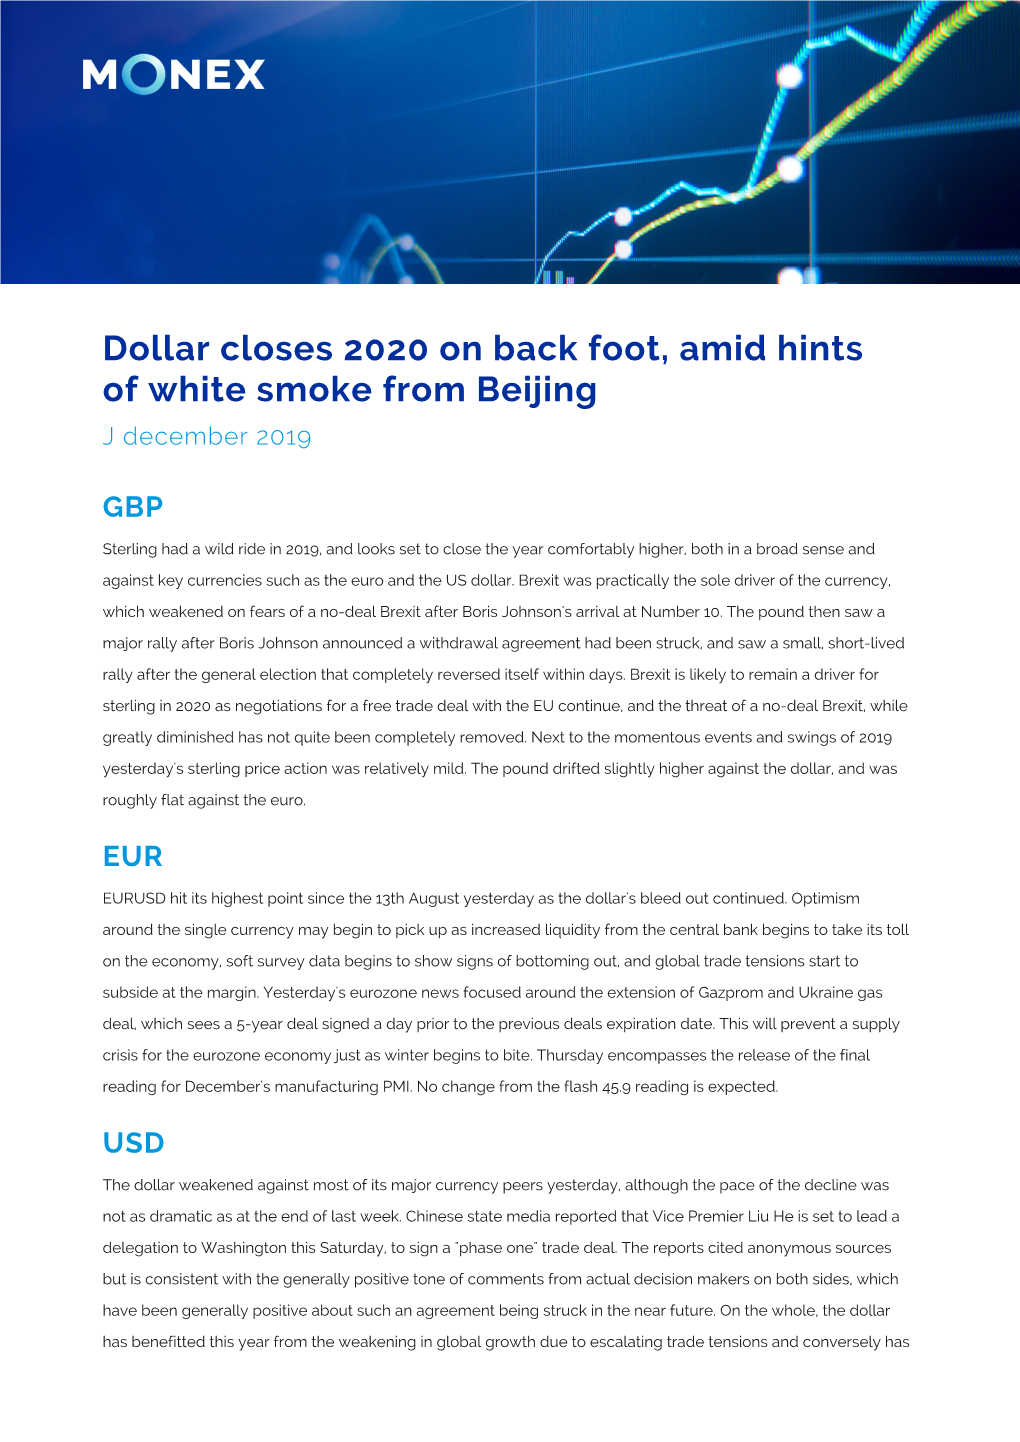 Dollar Closes 2020 on Back Foot, Amid Hints of White Smoke from Beijing J December 2019